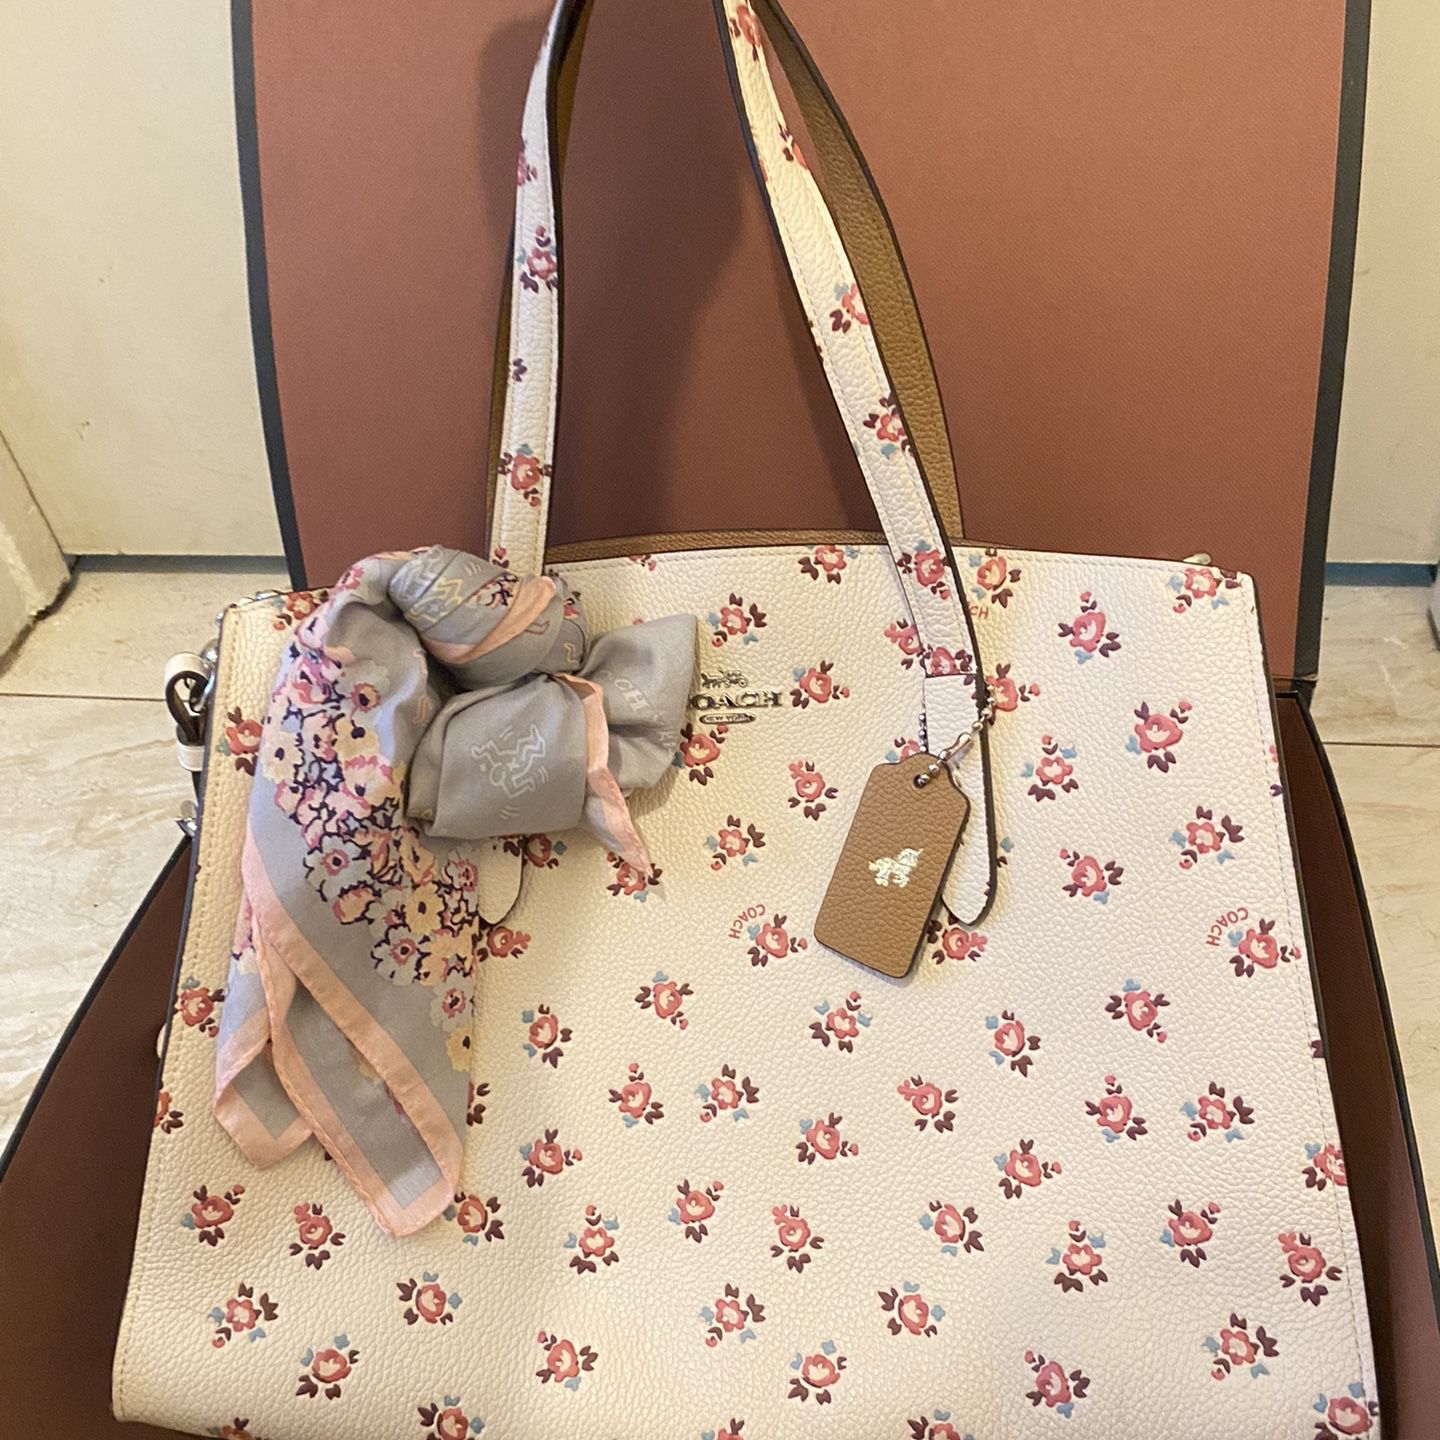 Coach Flower Tote Bags